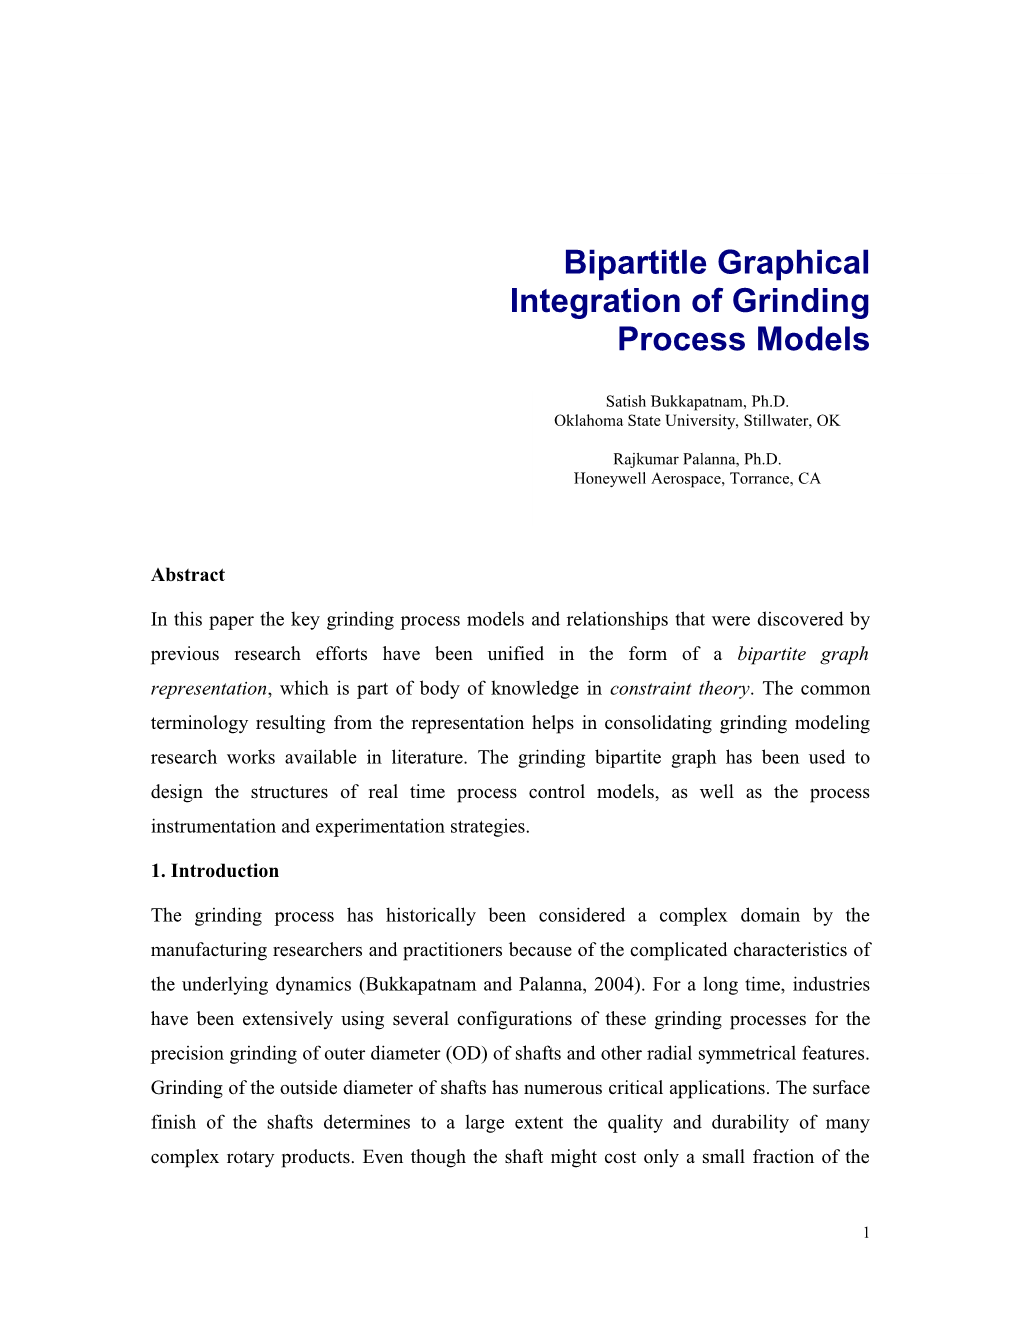 Review and Integration of Grinding Process Models